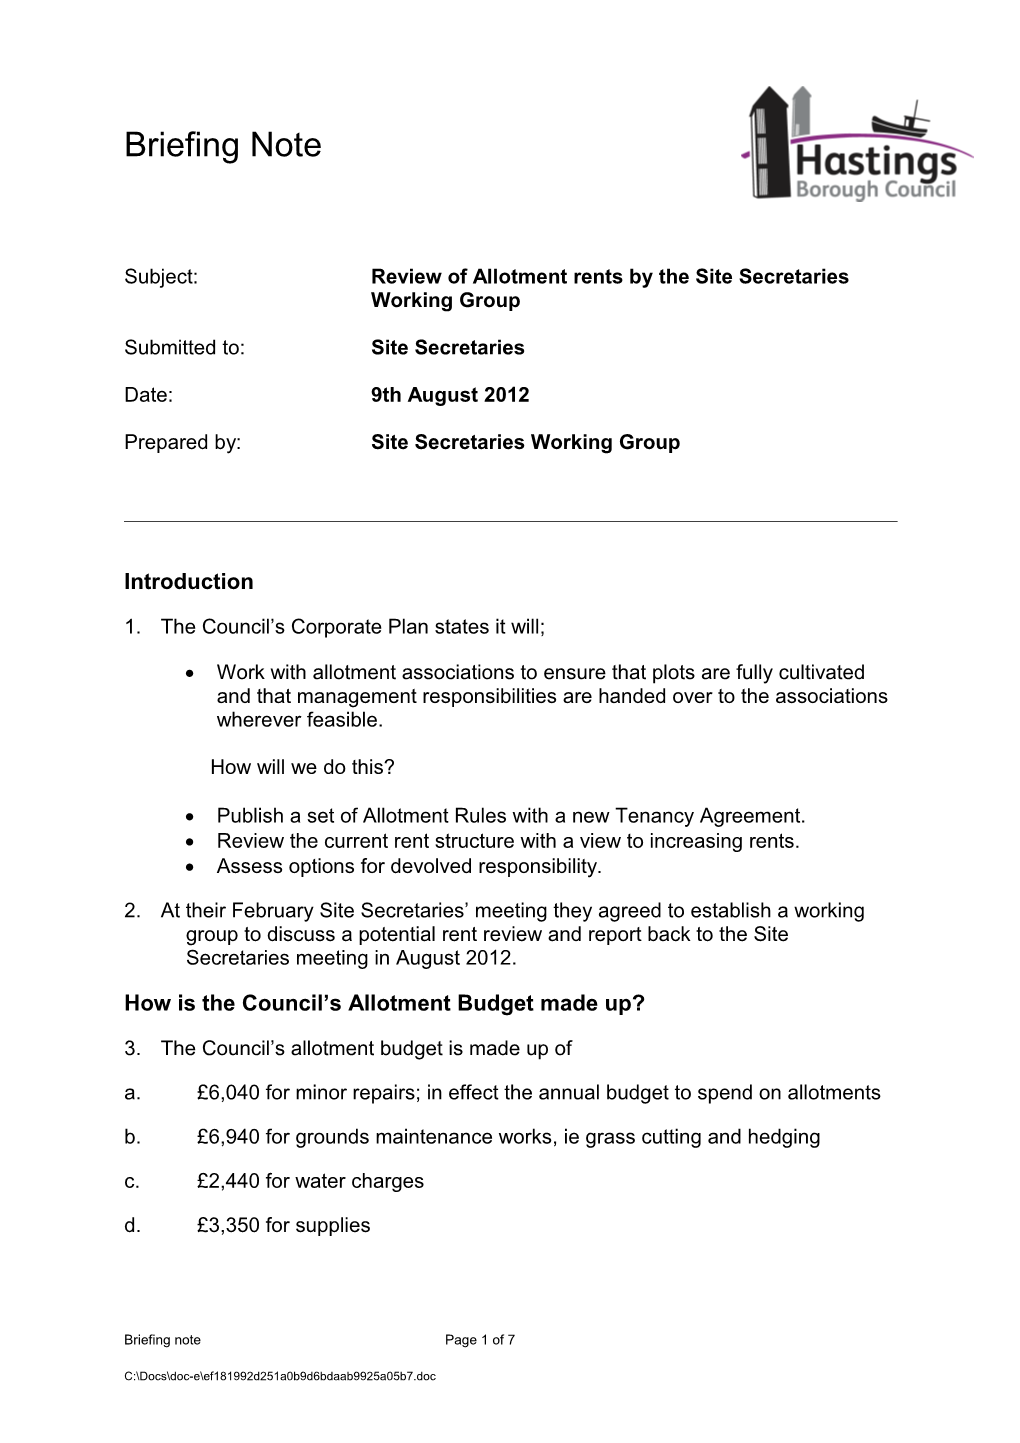 Subject: Review of Allotment Rents by the Site Secretaries Working Group